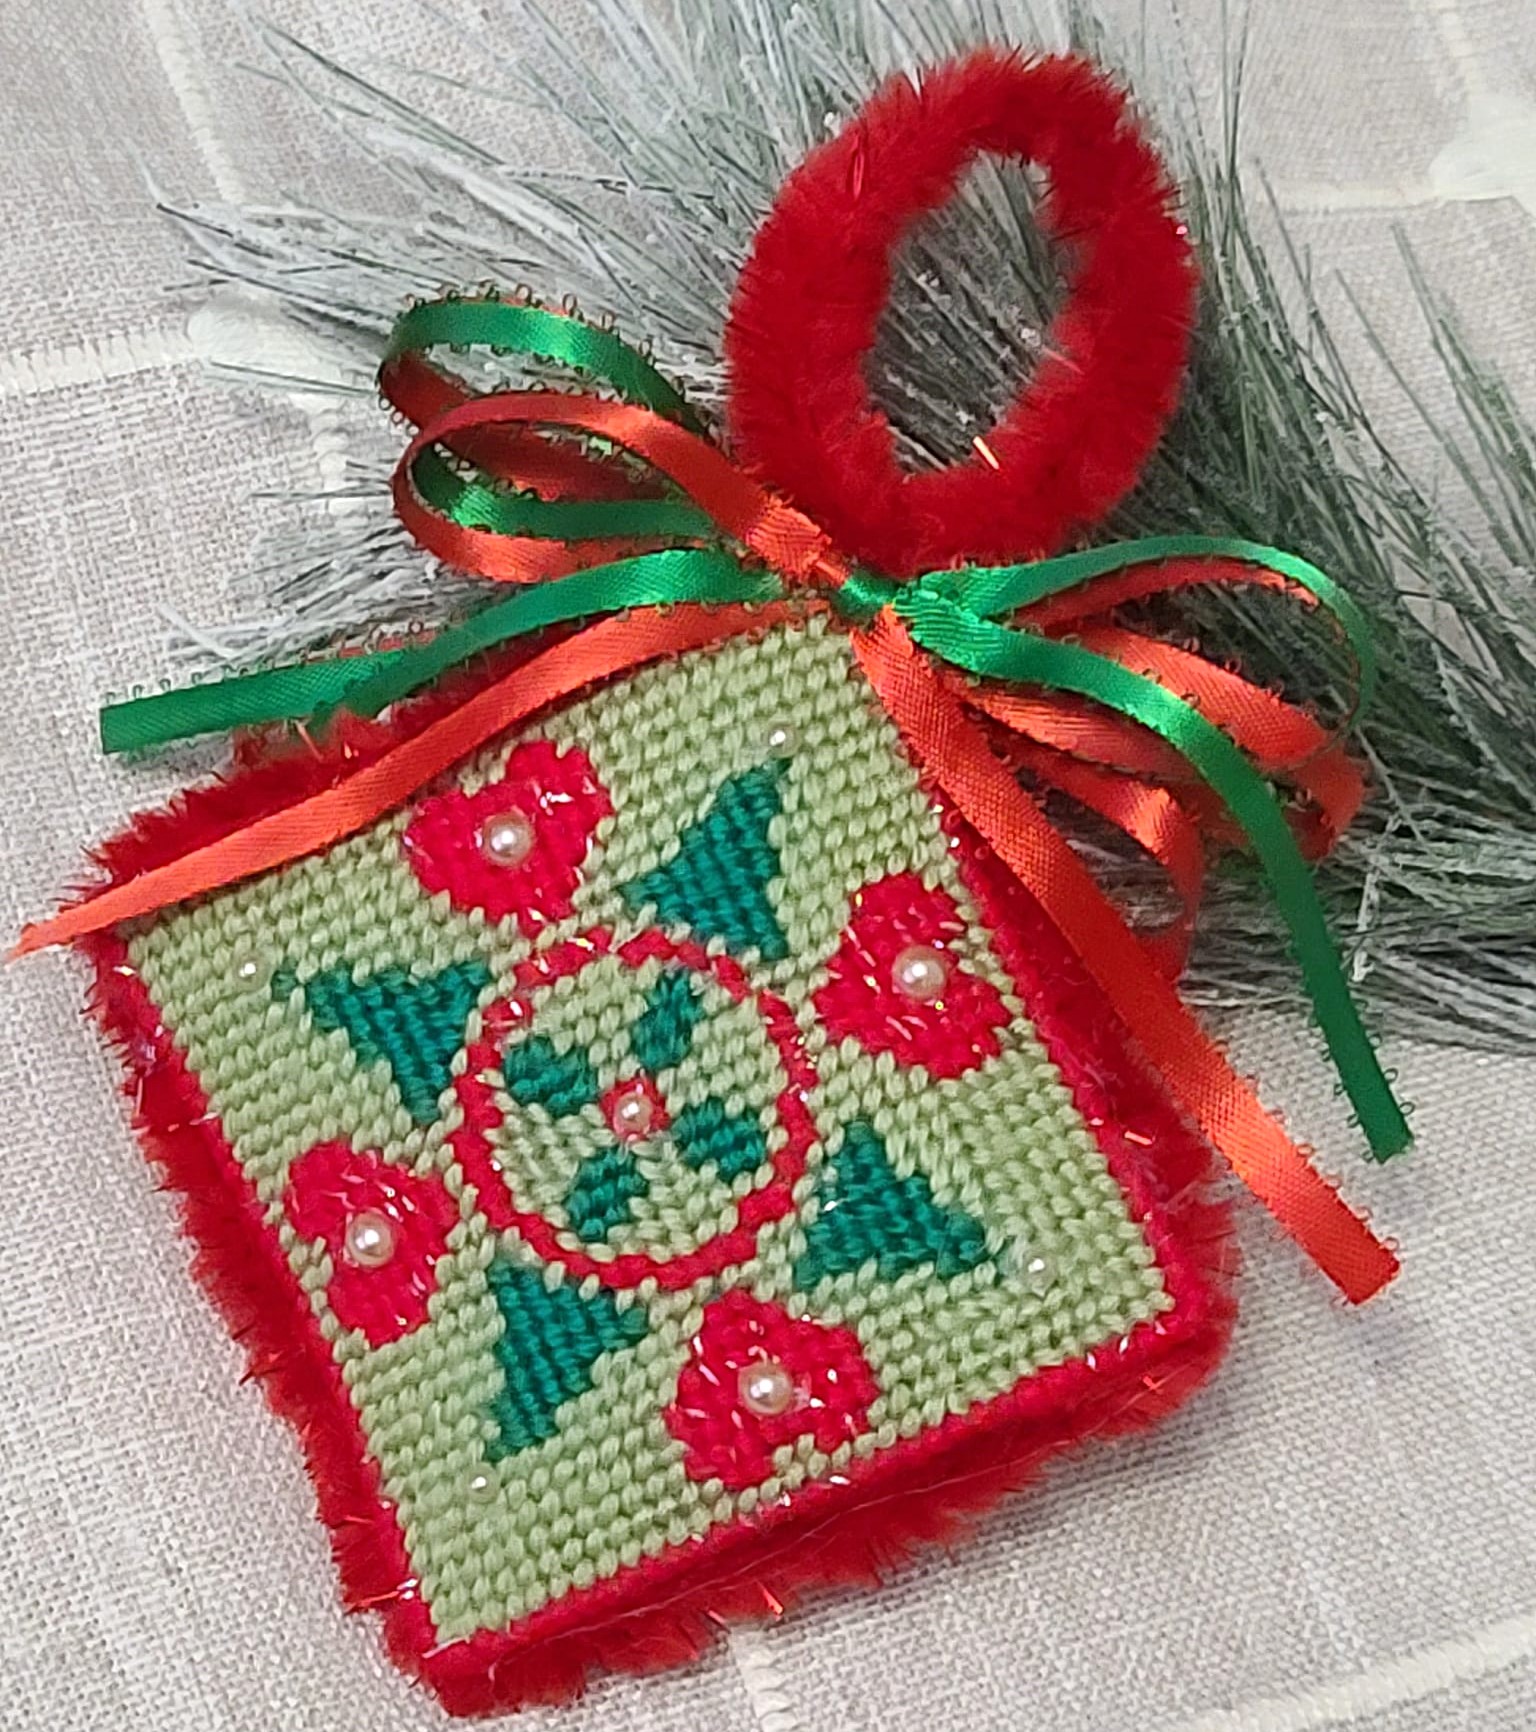 Needlepoint heart and evergreen trees hanger ornament